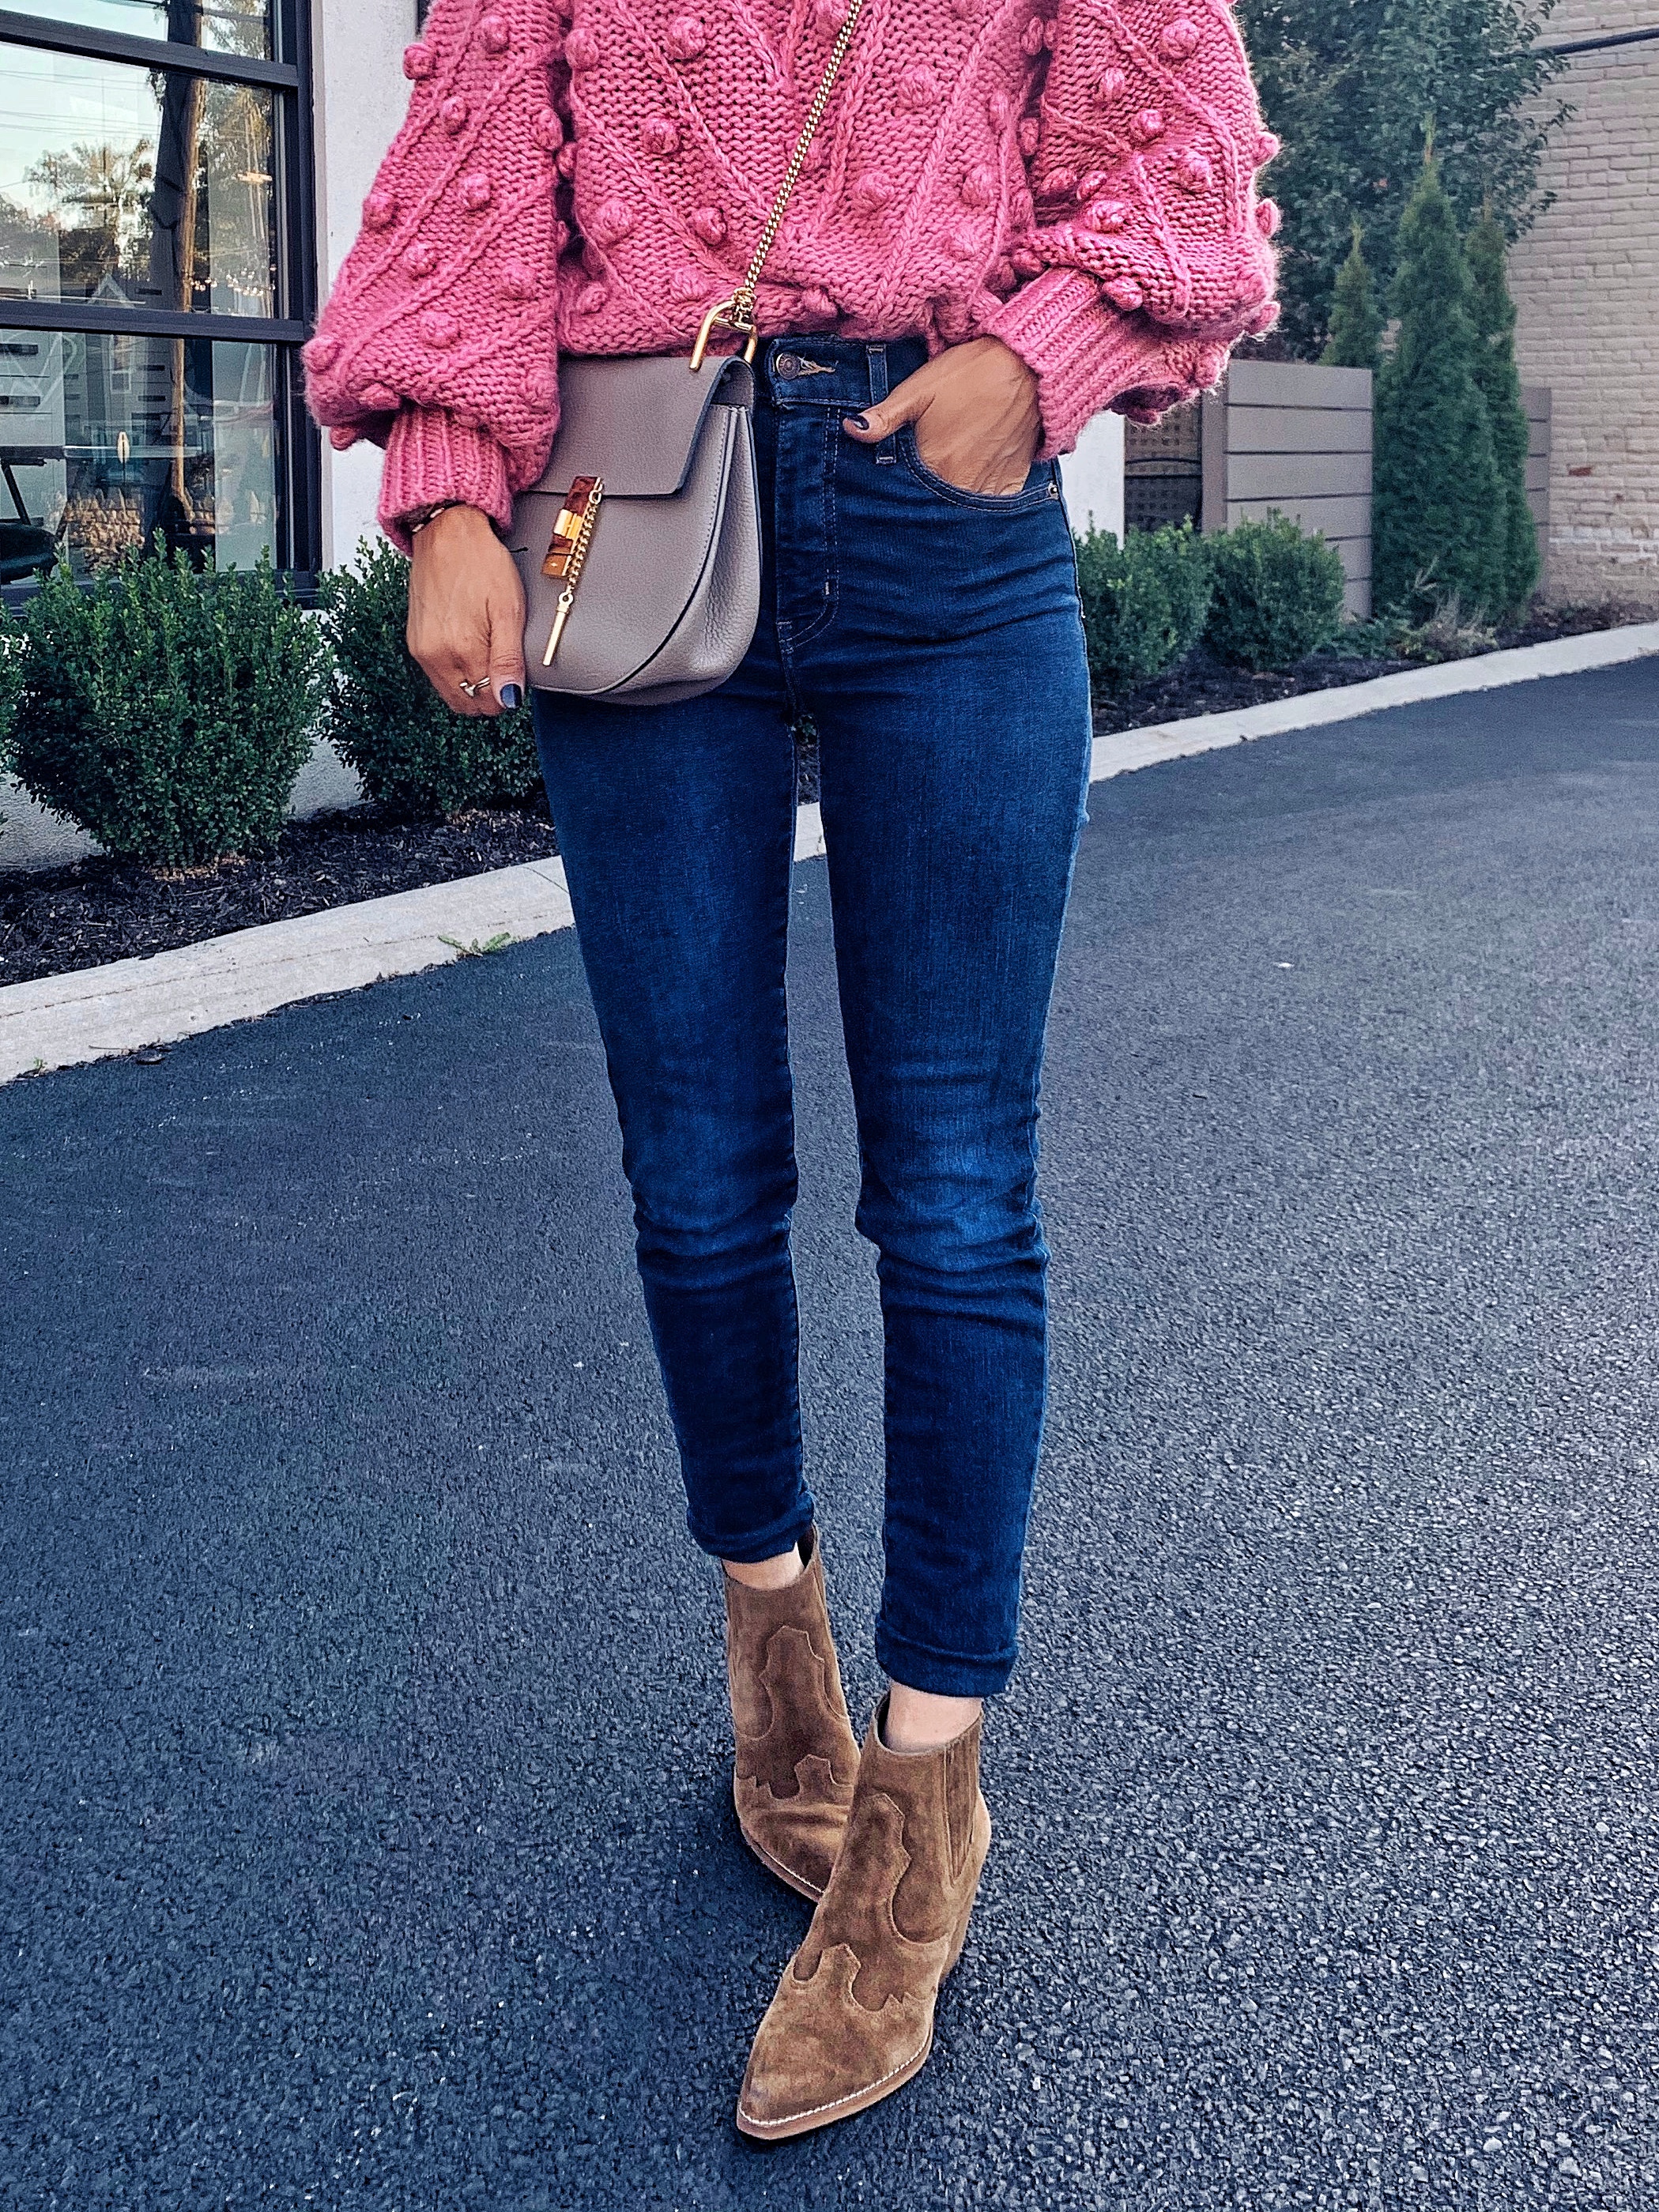 Suede booties for fall